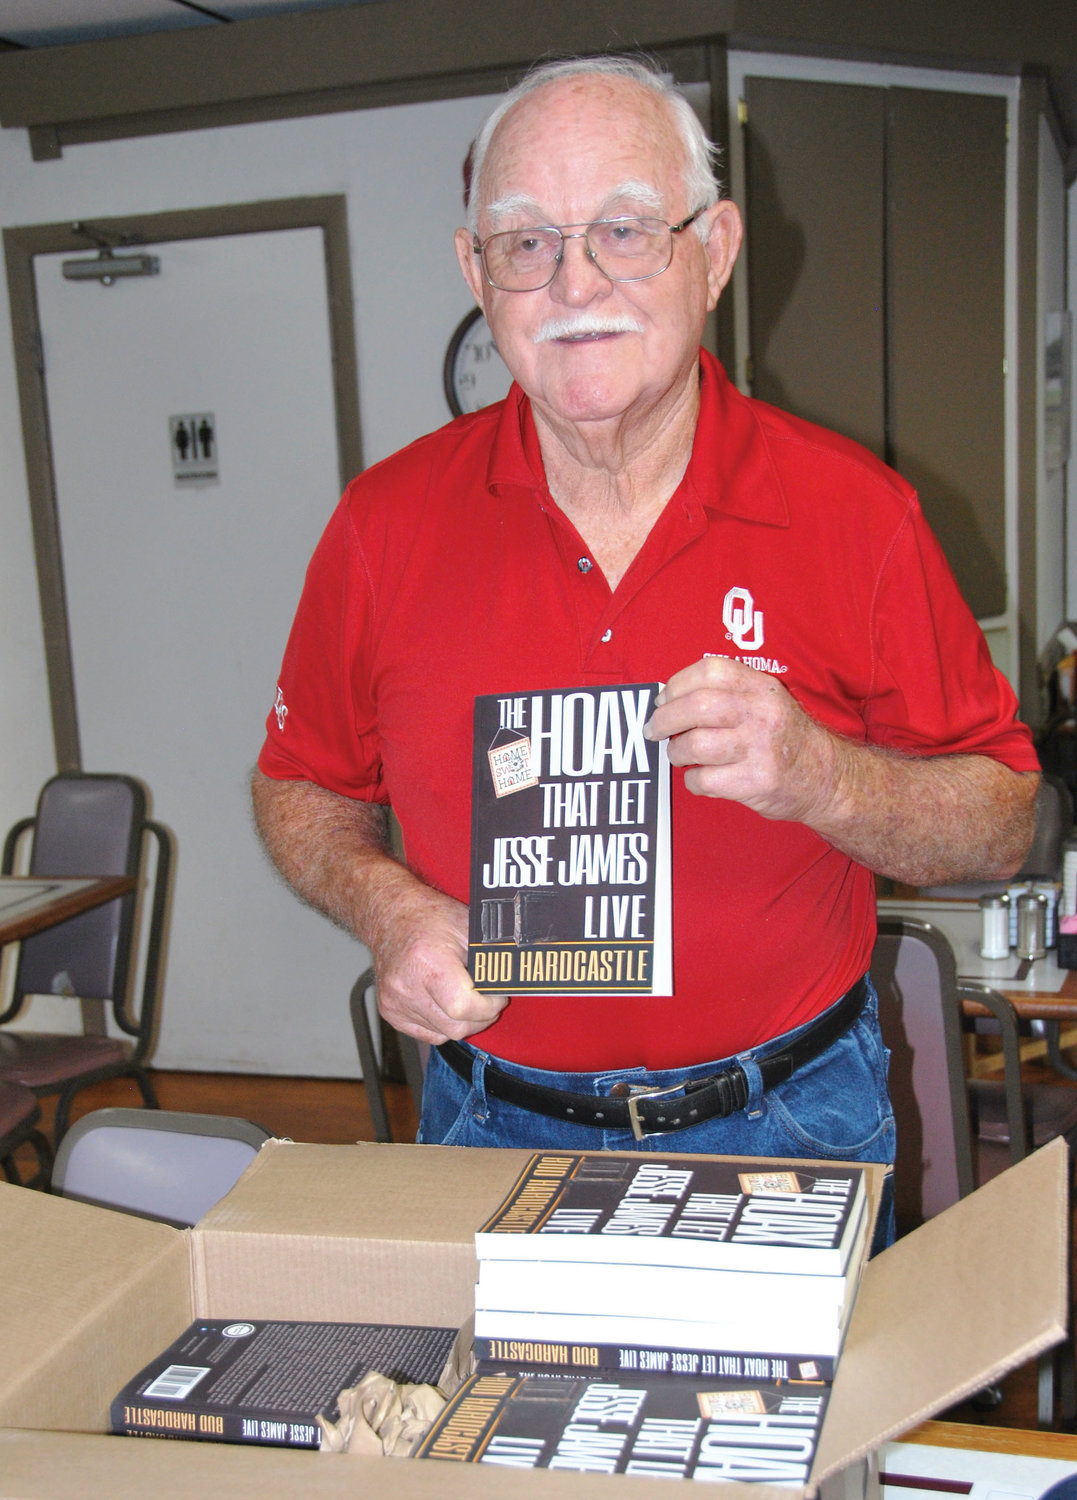 A shipment of Bud Hardcastle’s new book about Jesse James came into Purcell late last week.